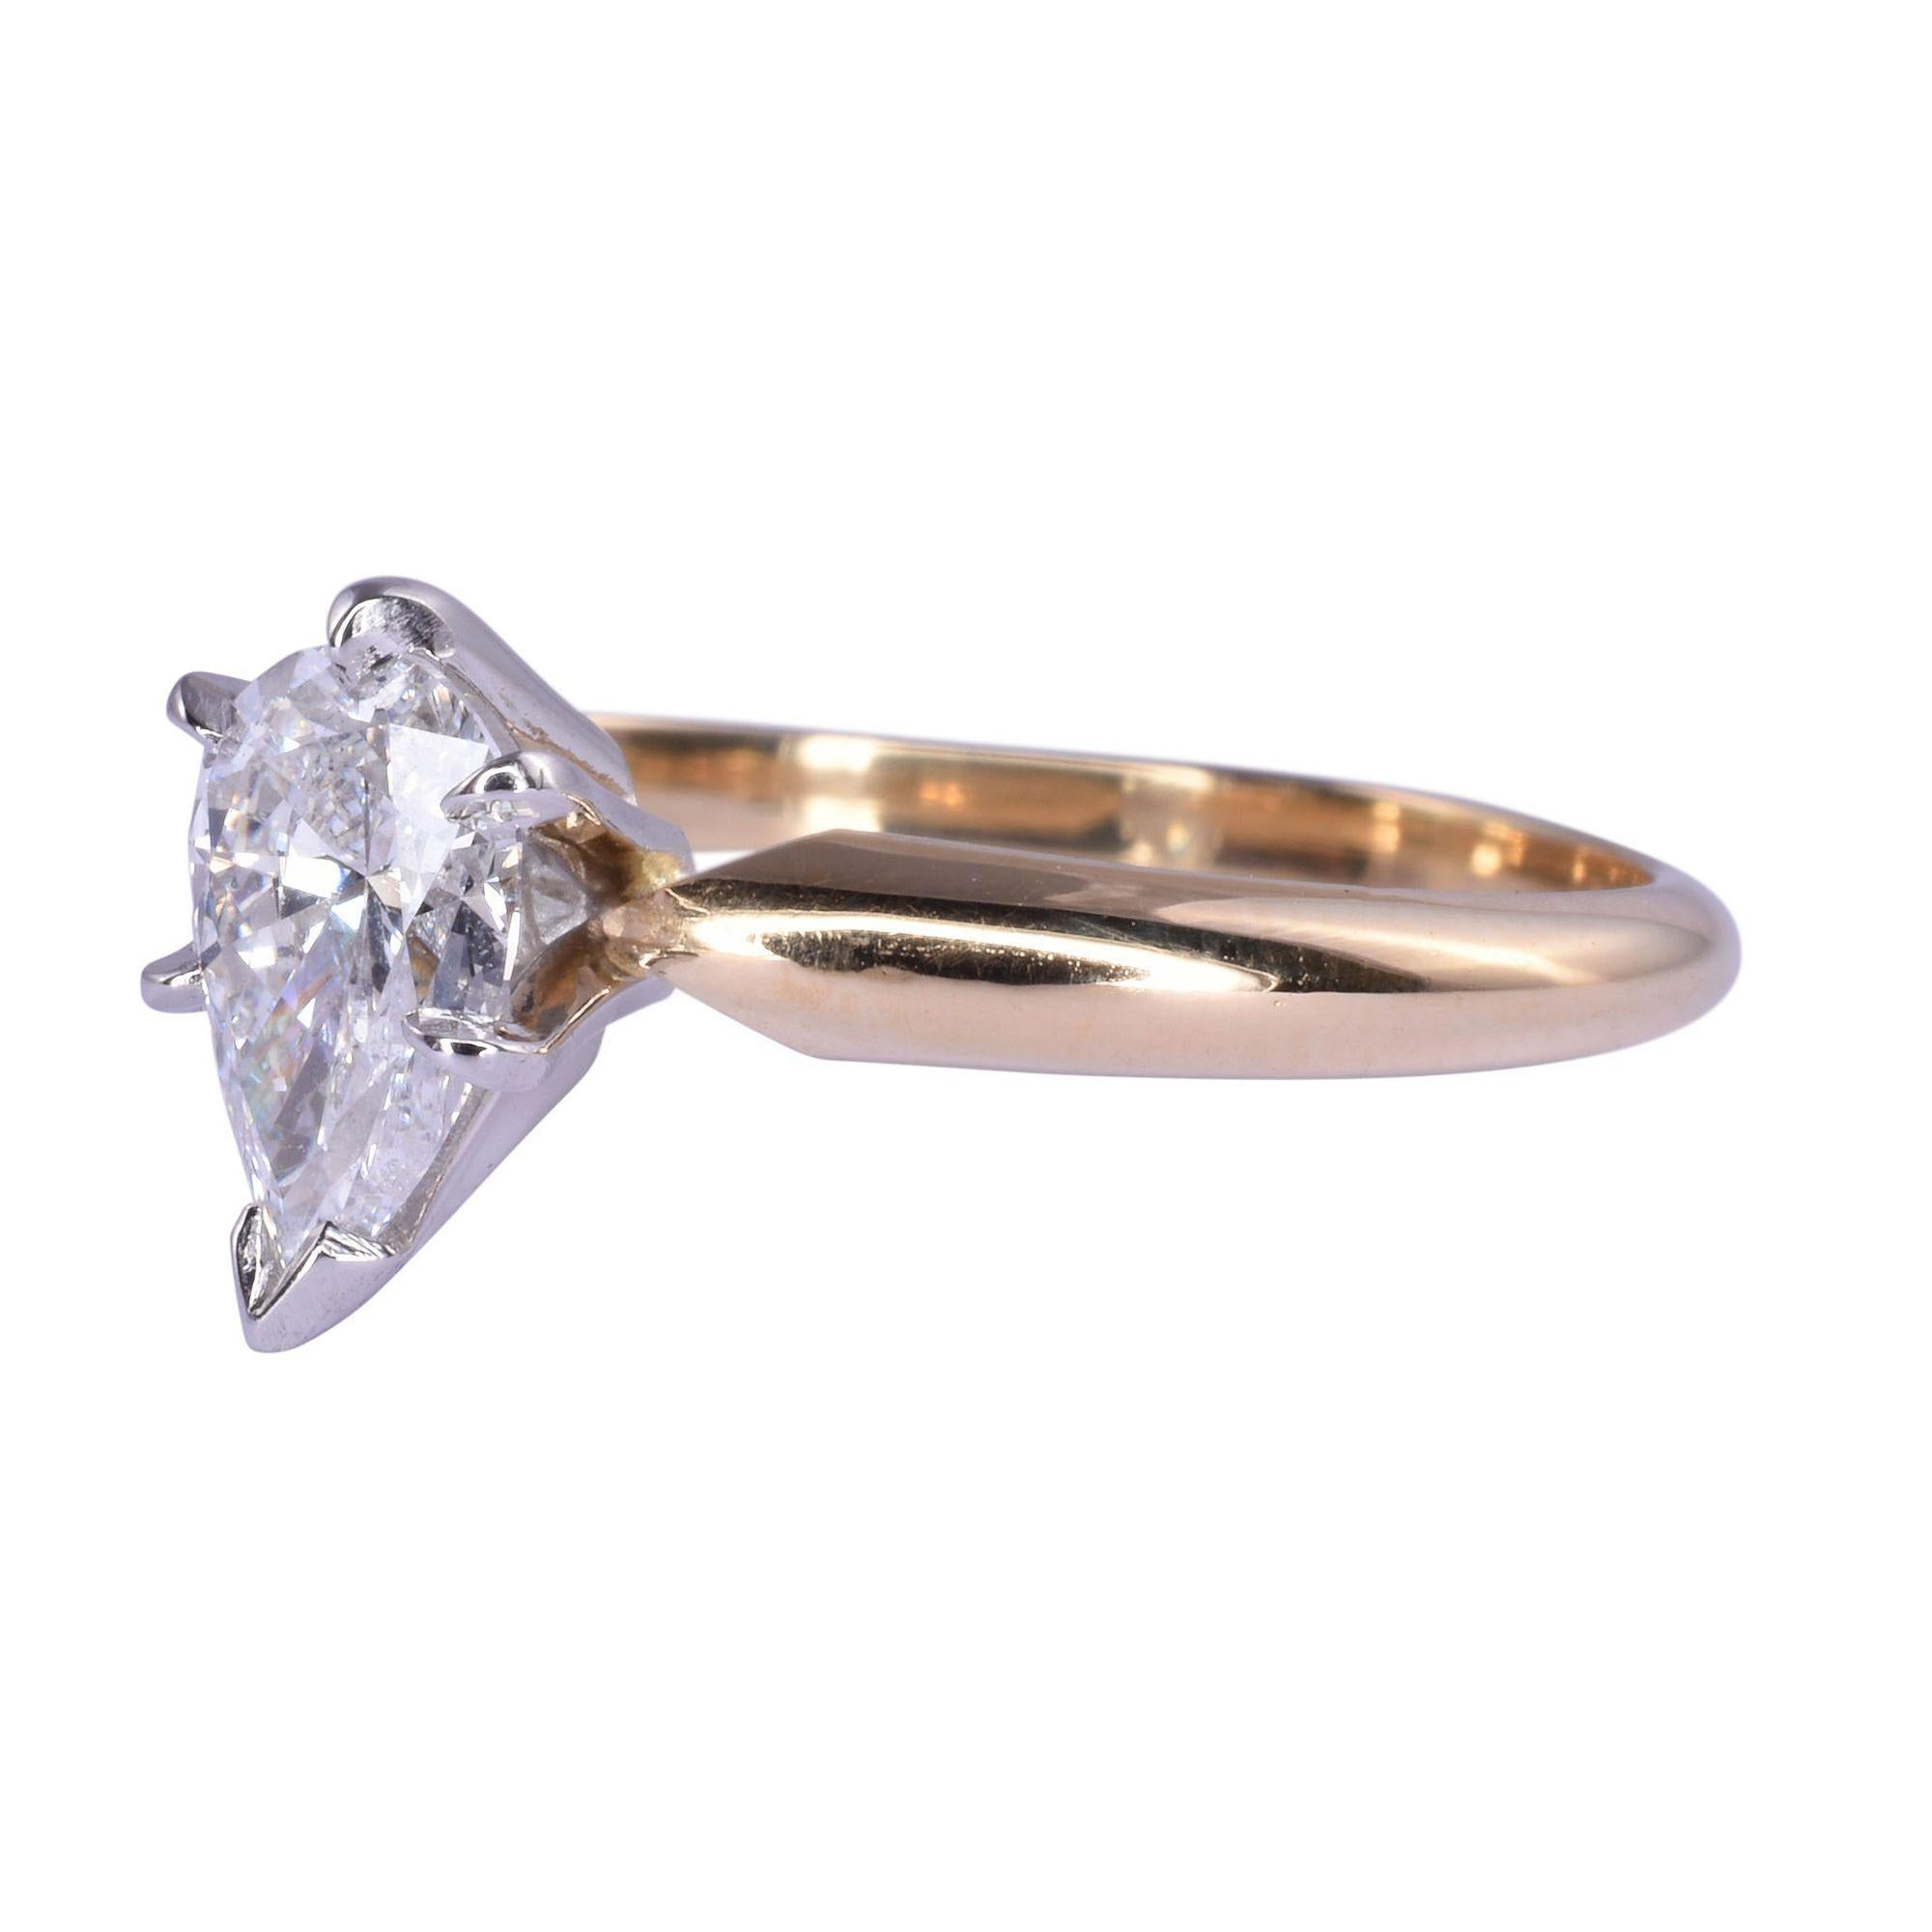 Estate pear solitaire diamond engagement ring. This ring has an 18 karat yellow gold shank with a platinum head. The .82 carat pear diamond has I1 clarity and F color. This diamond ring weighs 2.73 grams, is appraised at $3,900, and is a size 6.5.